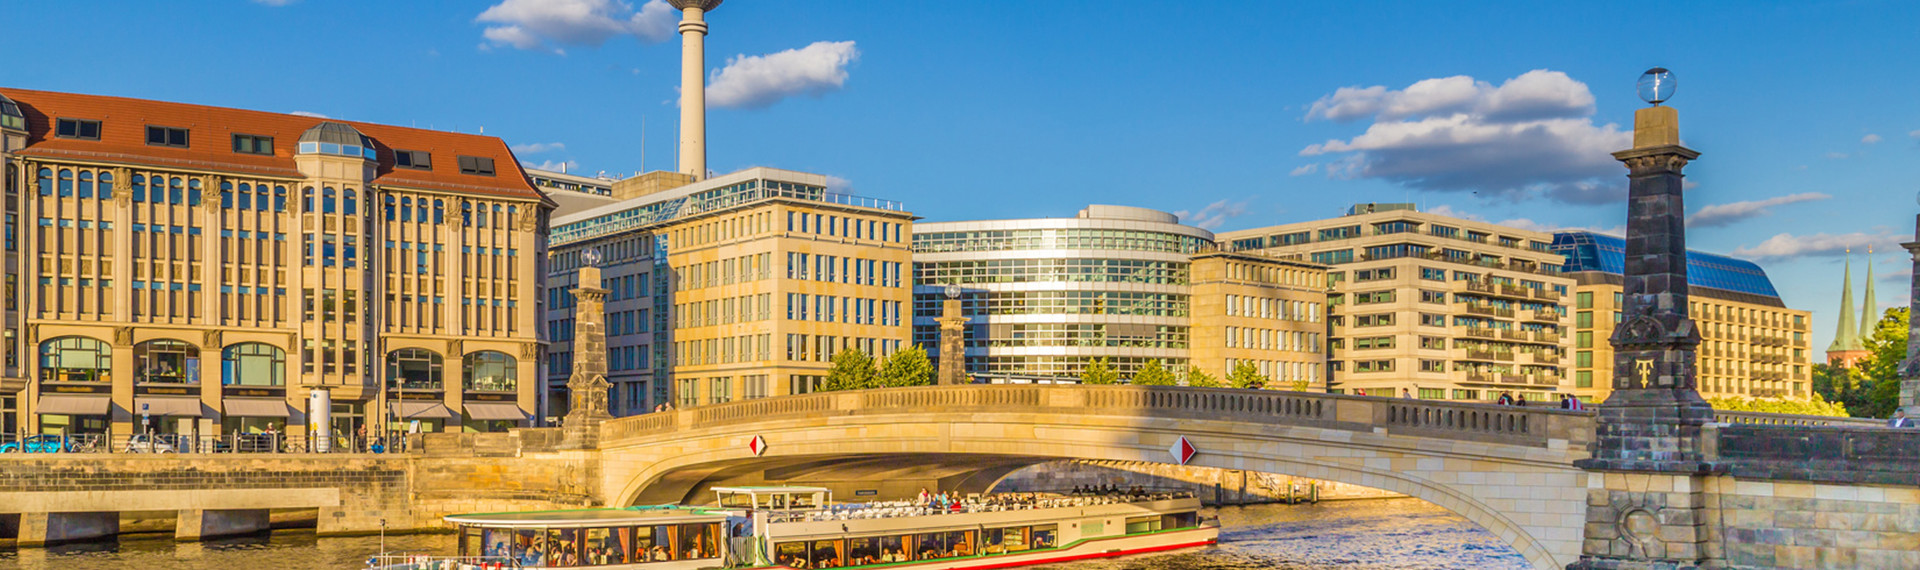 Boat Sightseeing Tour in Berlin for Stag Dos | Pissup